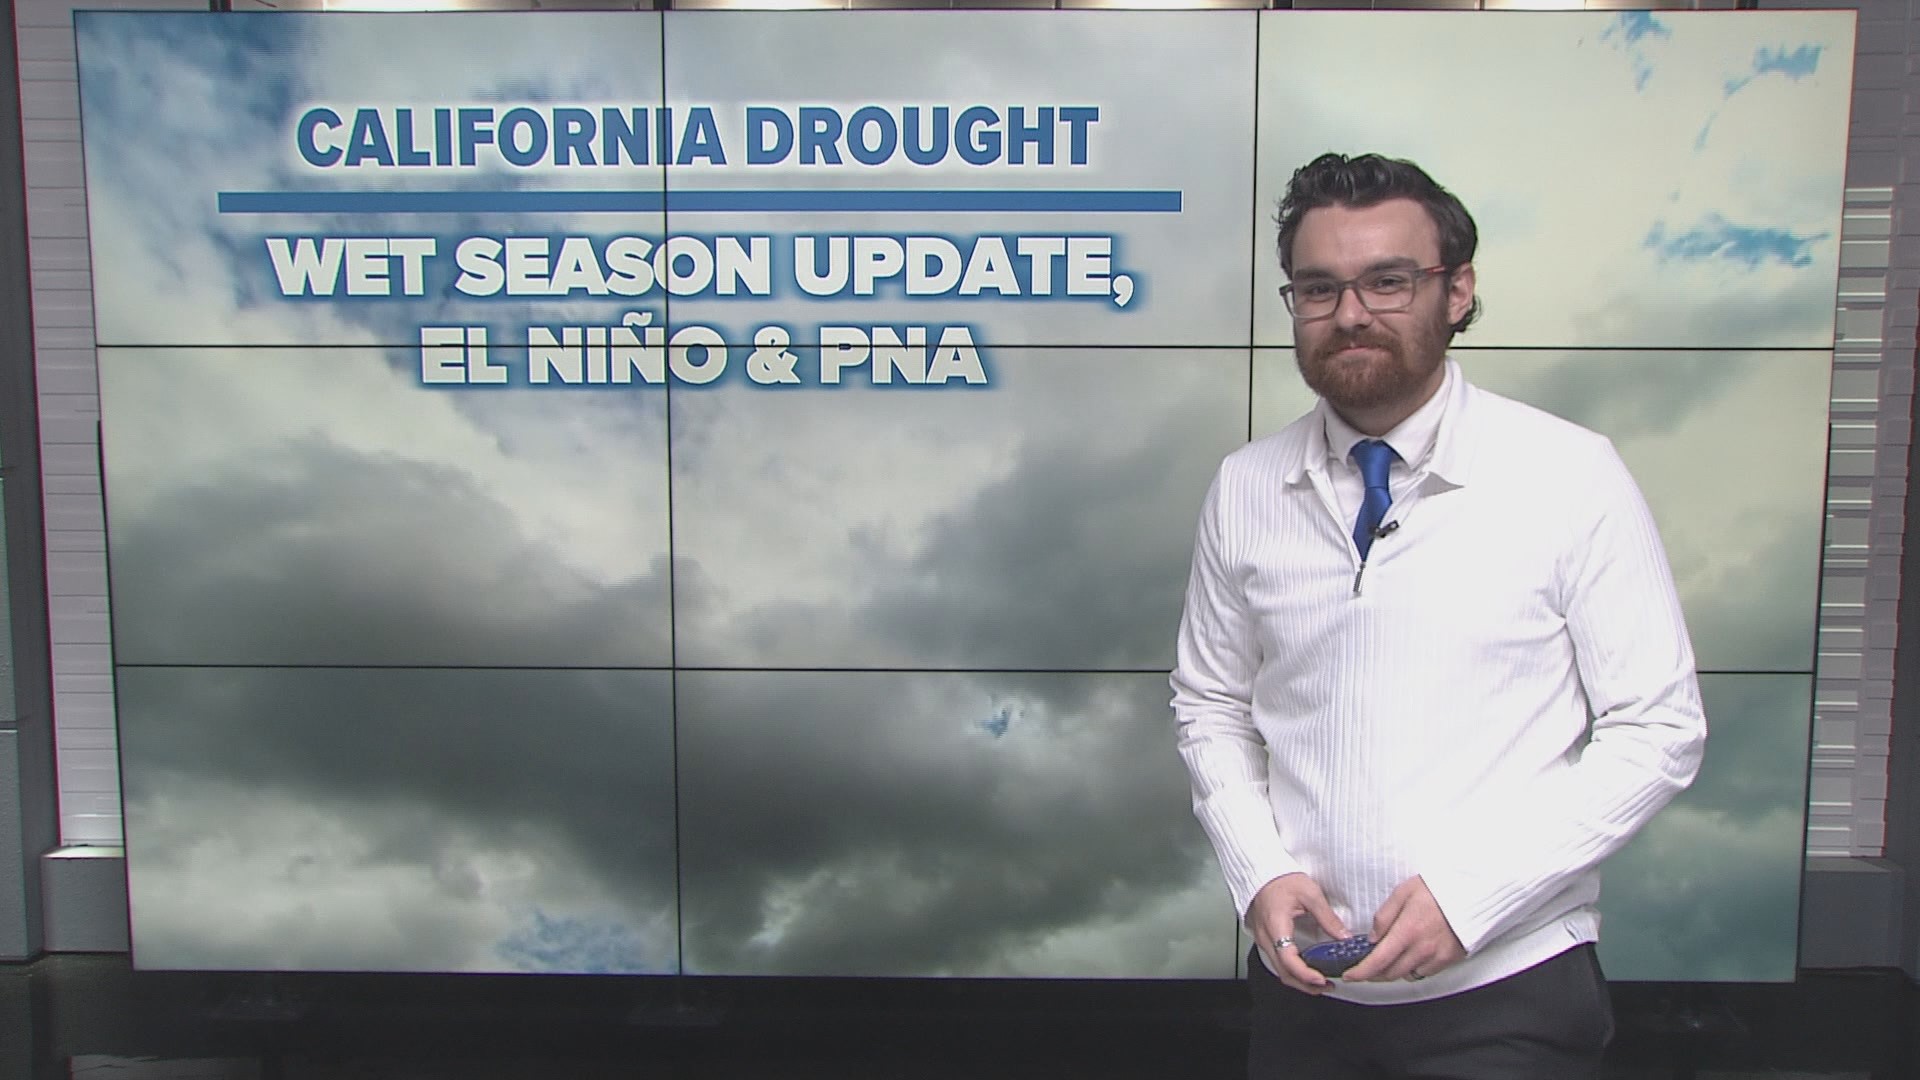 It has been a slow start to the wet season, but that doesn't mean things are bad! Plus, El Niño is still brewing in the Pacific & there's signs of more rain & snow.